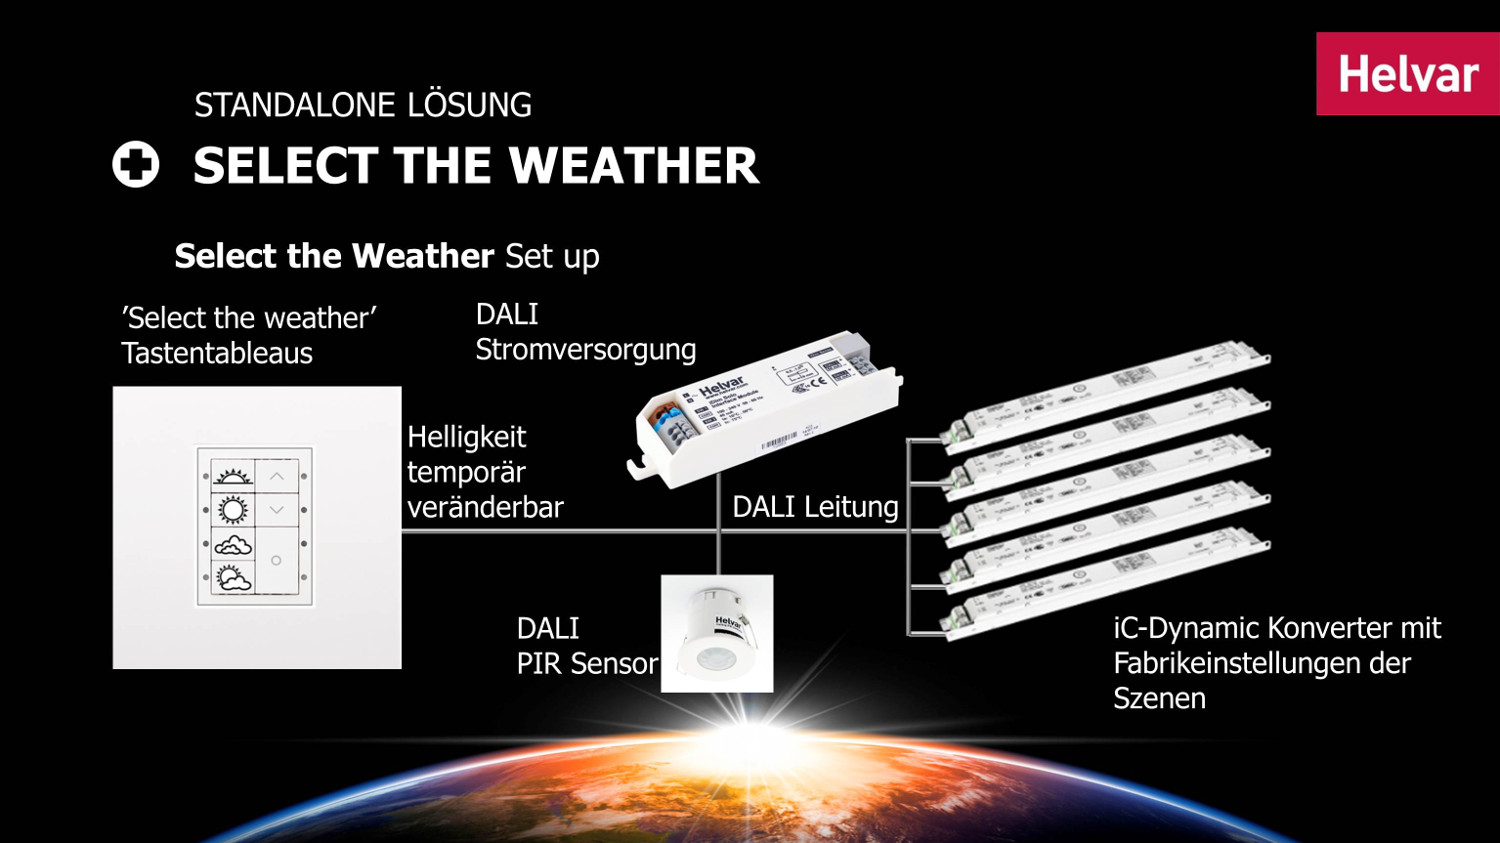 "Select the Weather"-Systemaufbau